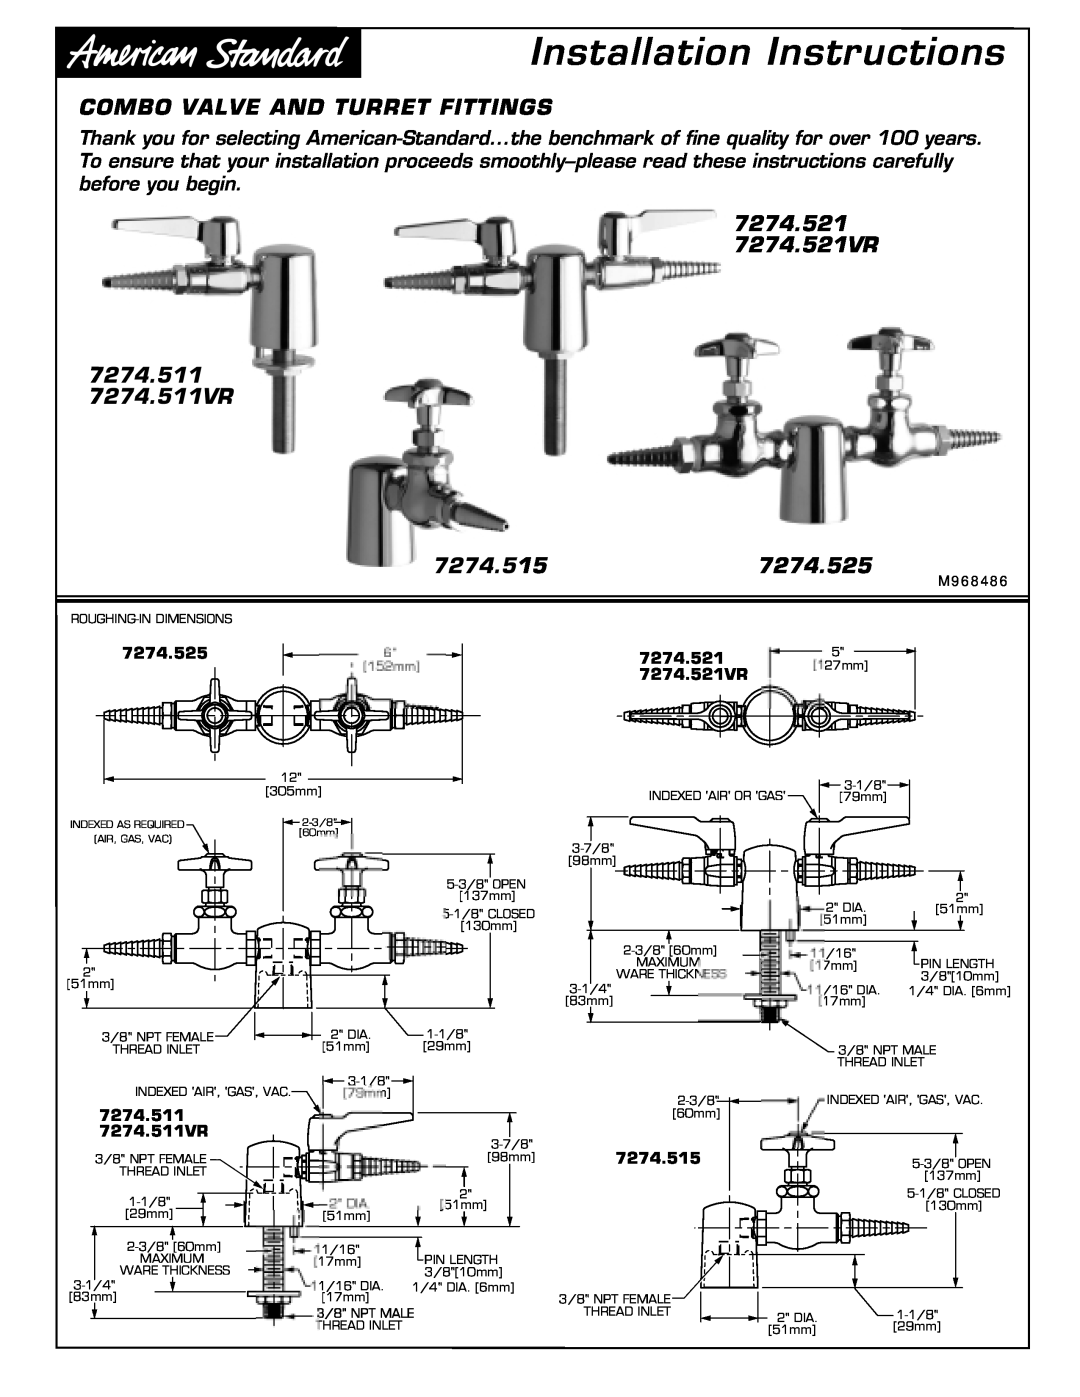 American Standard installation instructions Combo Valve And Turret Fittings, 7274.5157274.525, 7274.521VR, 7274.511 